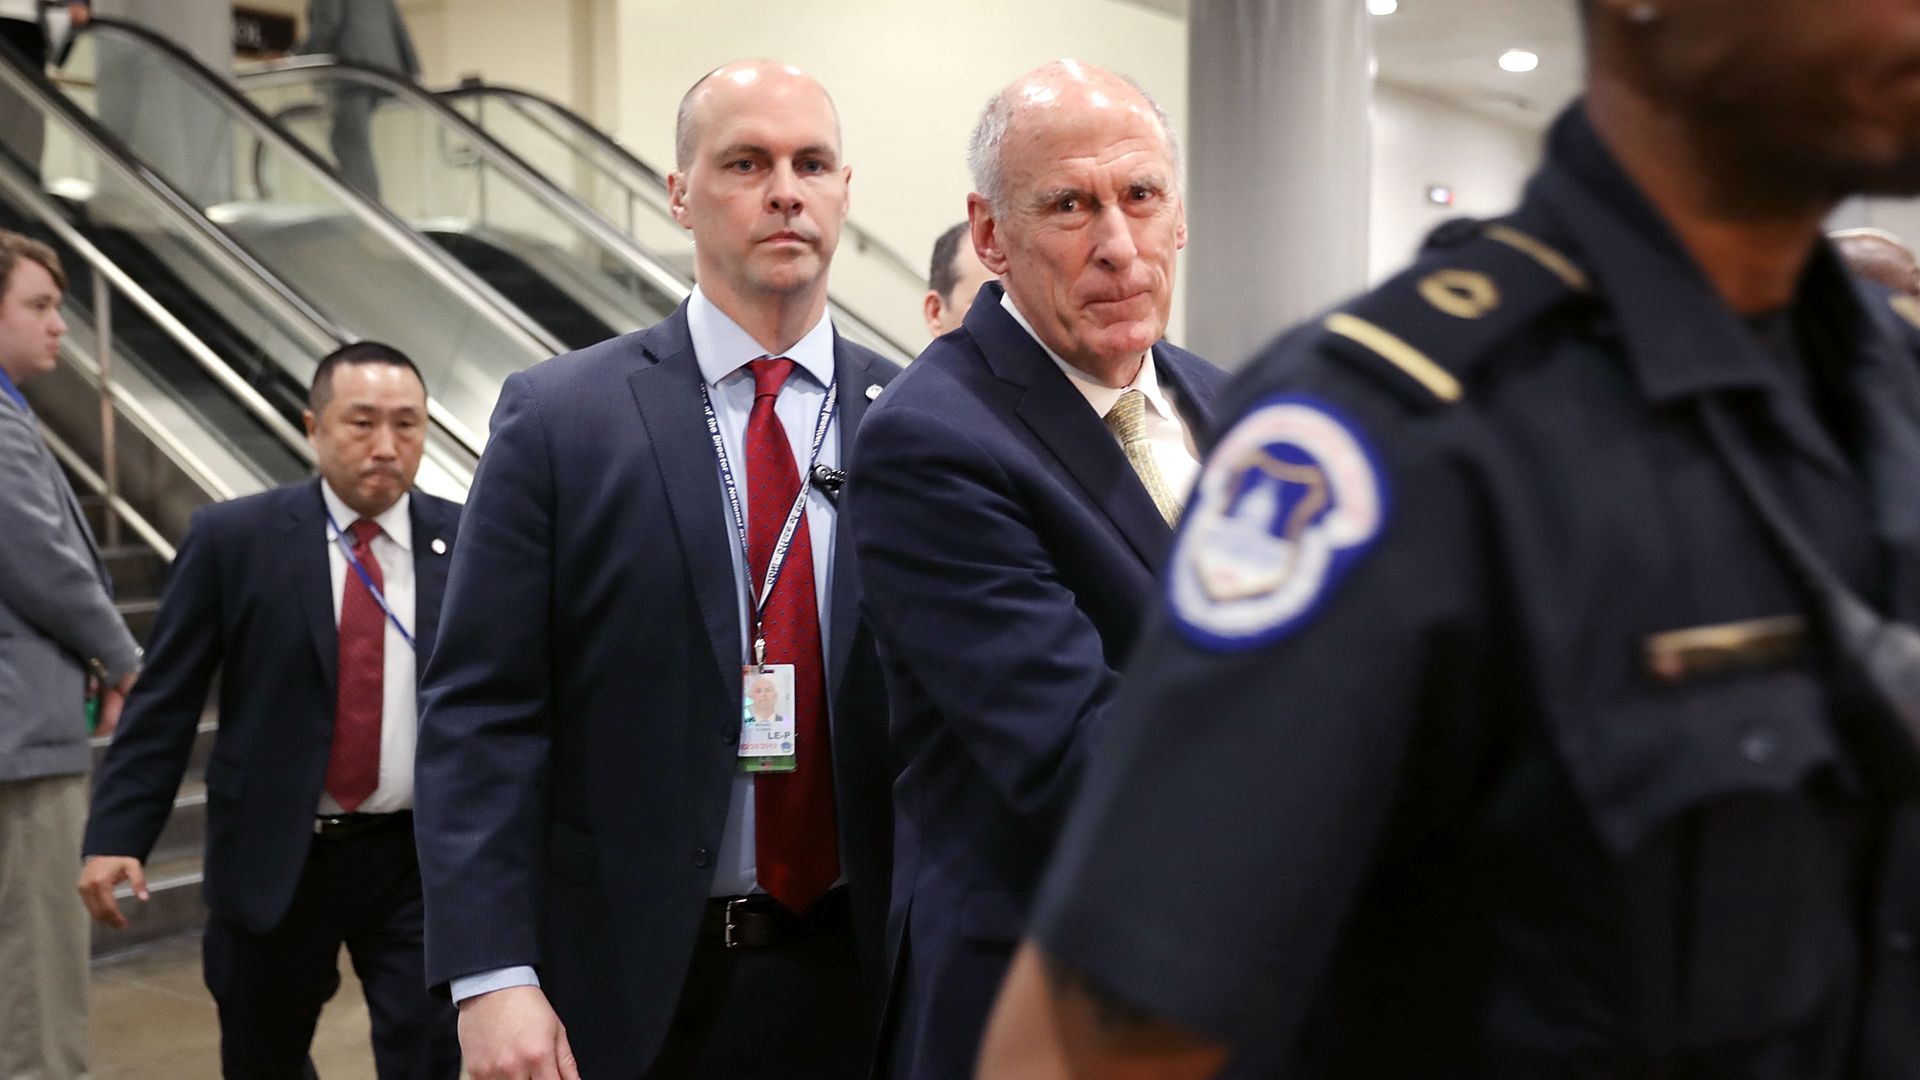 Director of National Intelligence Dan Coats walking through a hallway surrounded by security